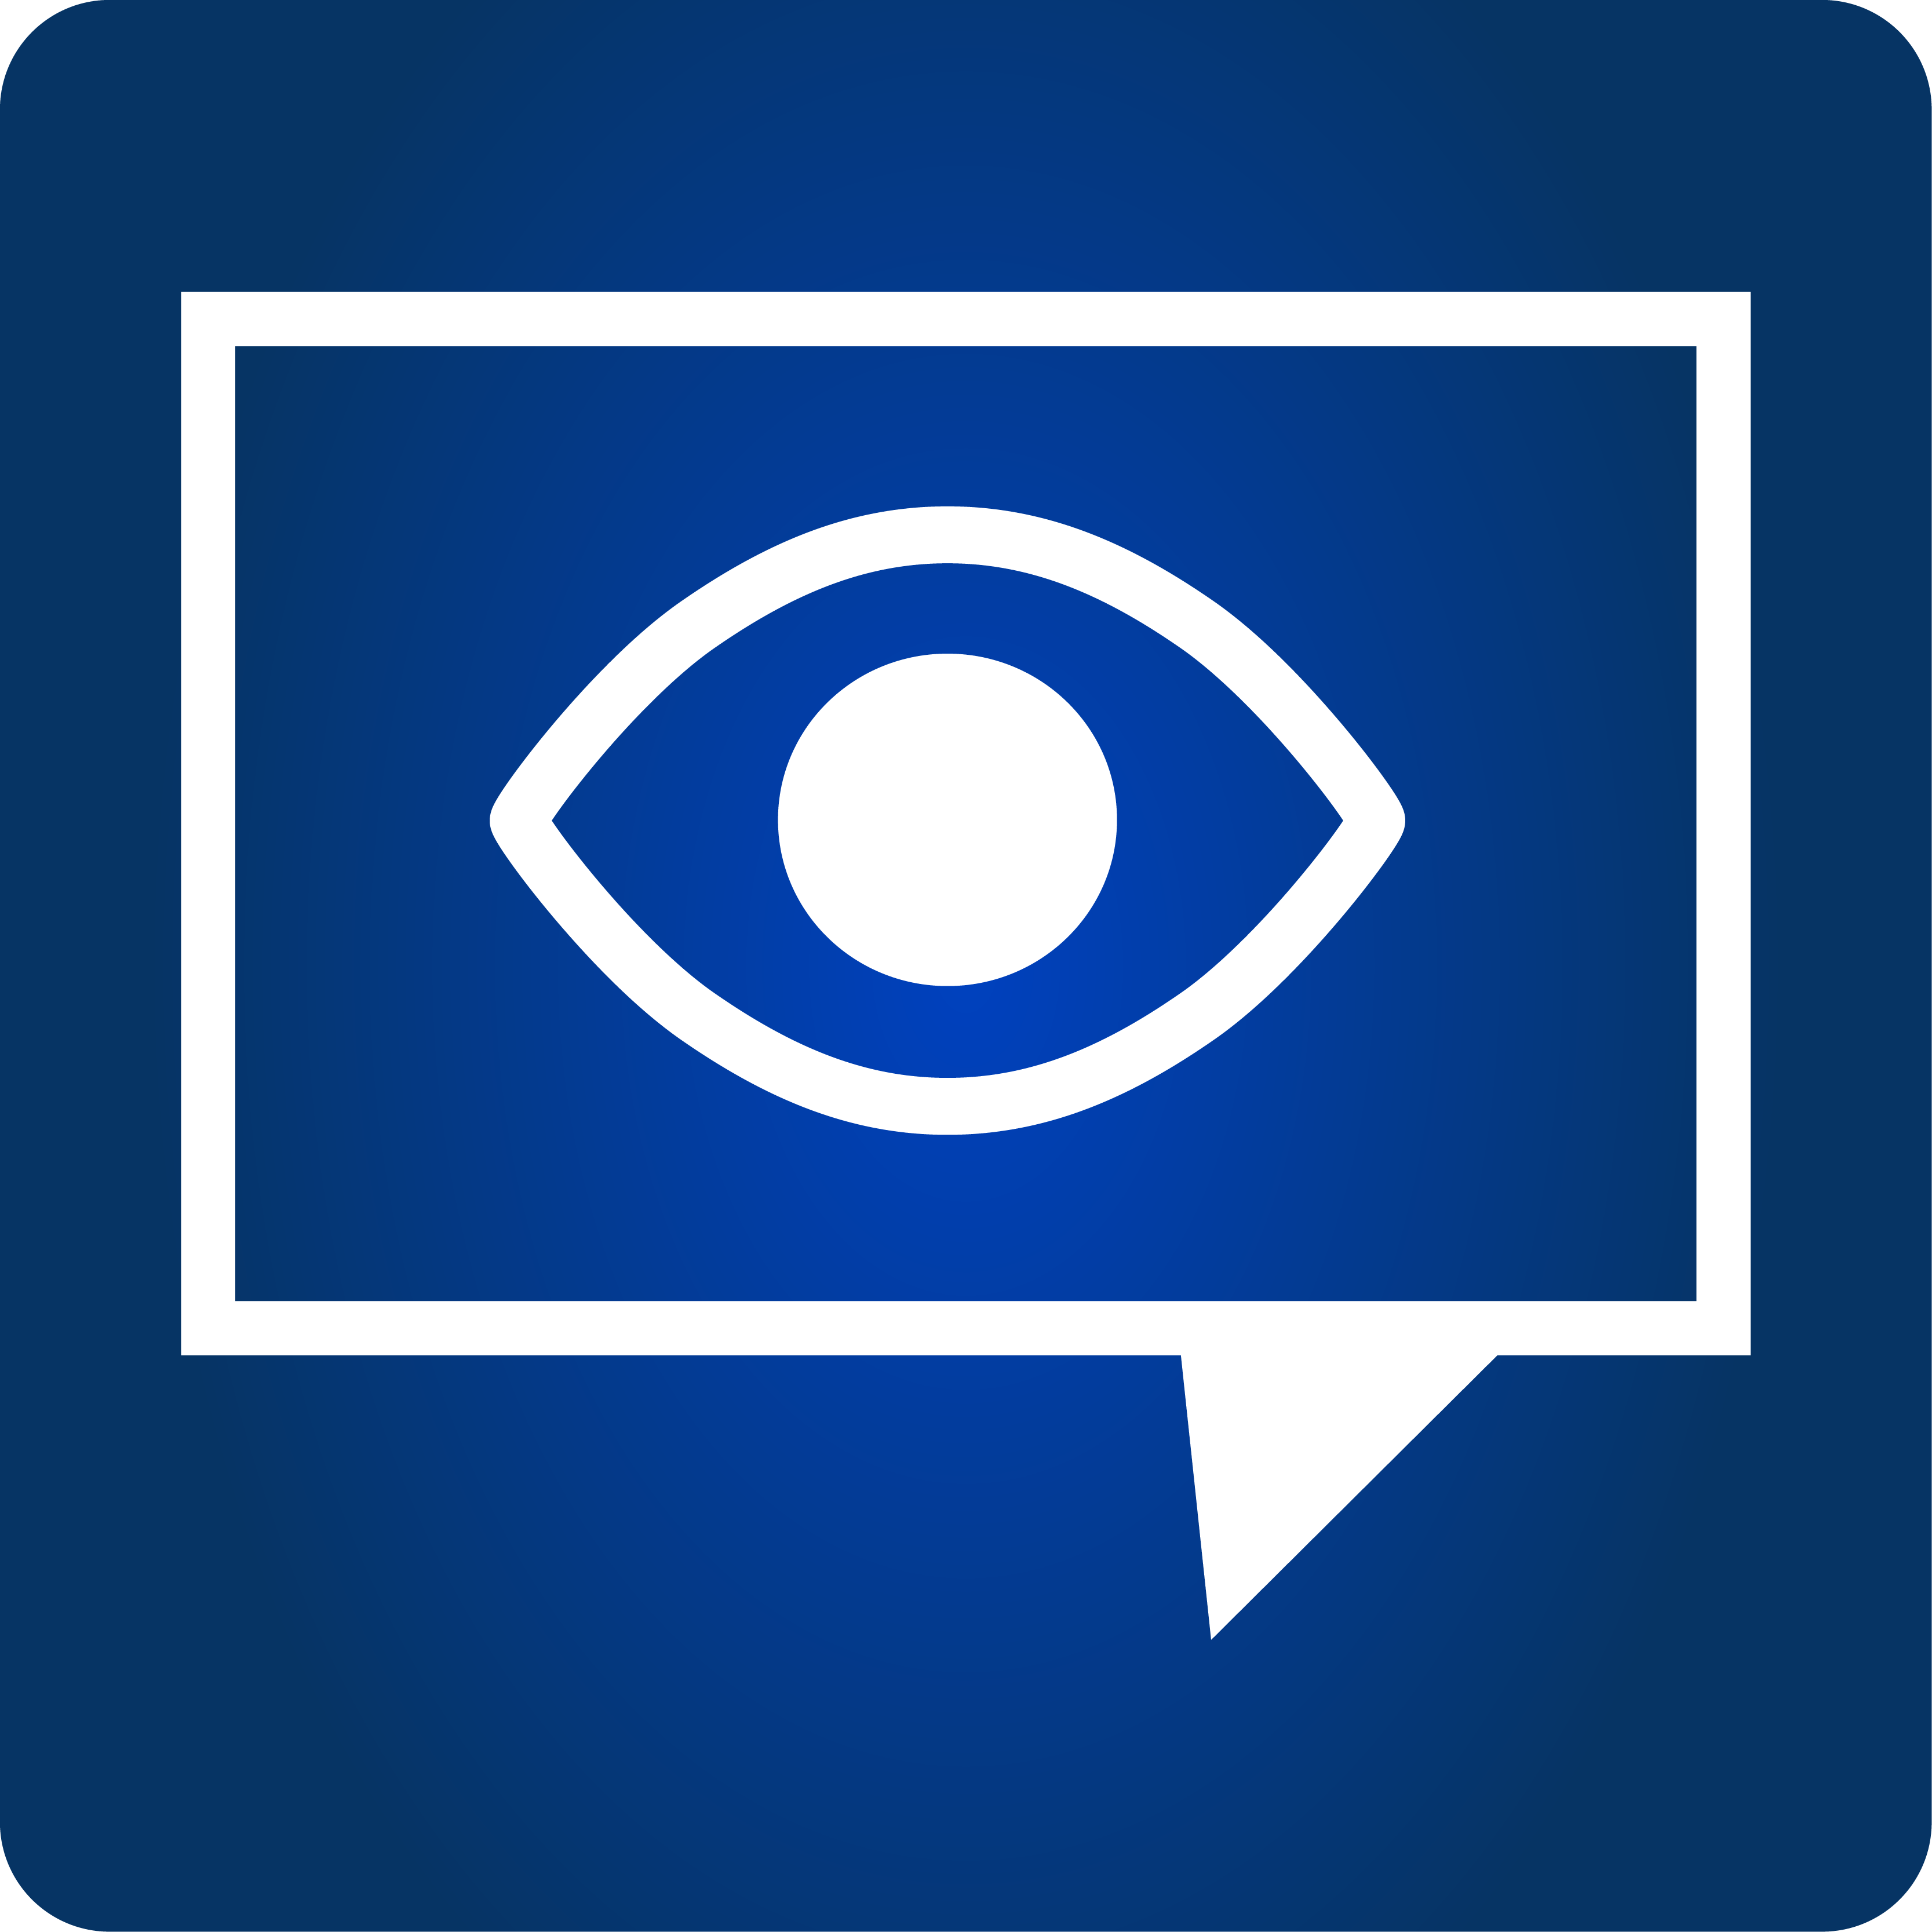 Quick Chat icon - Chat bubble with eye in center.